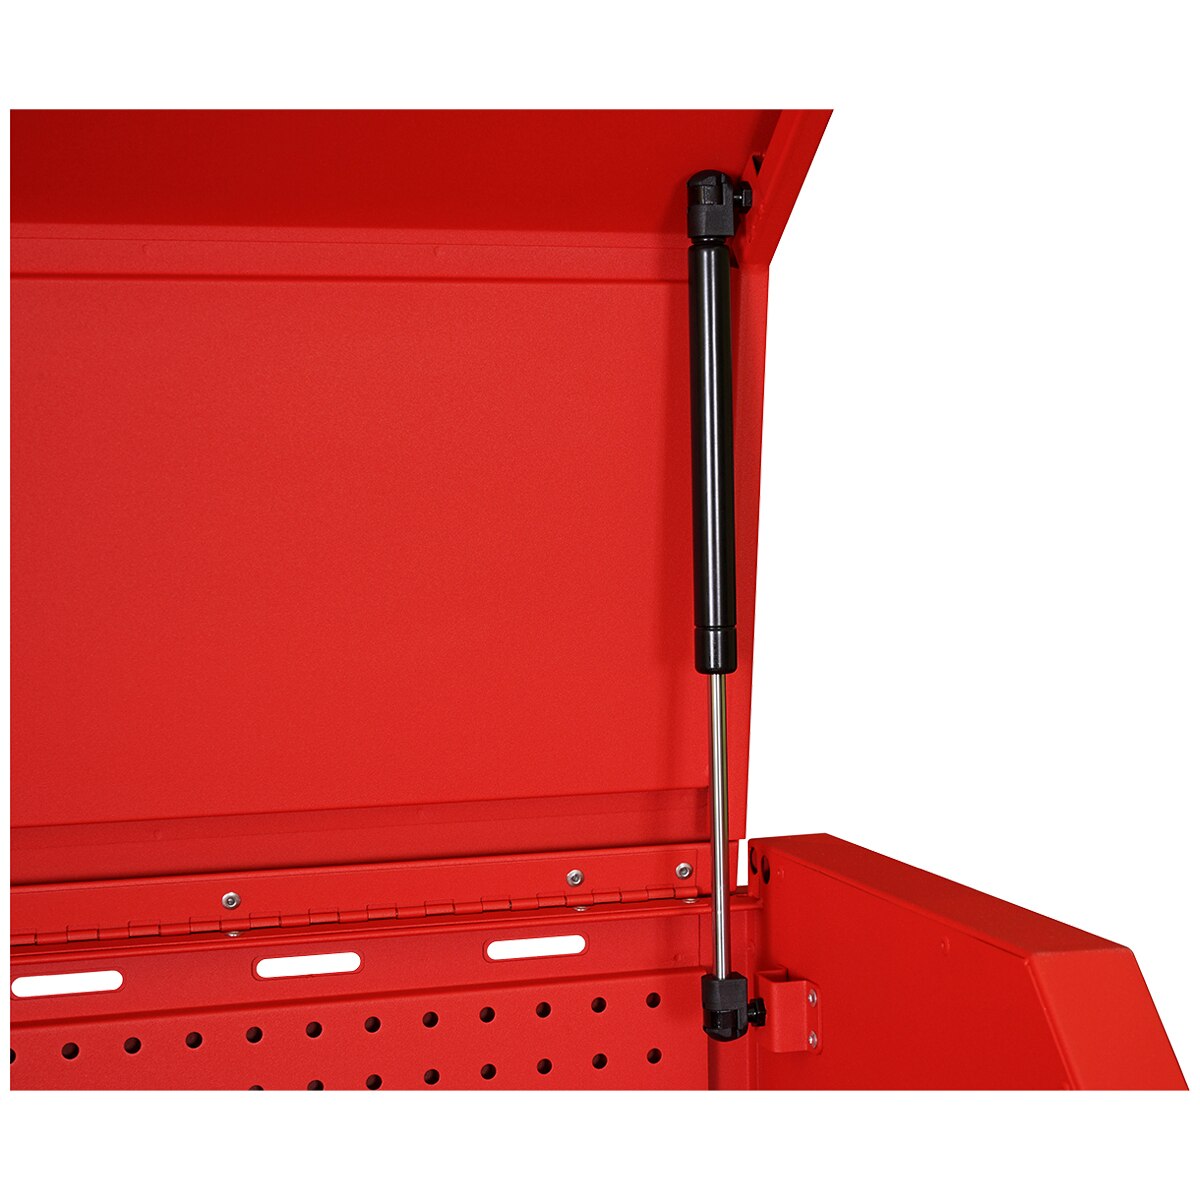 CSPS Tool Chest & Cabinet 109.2cm Red